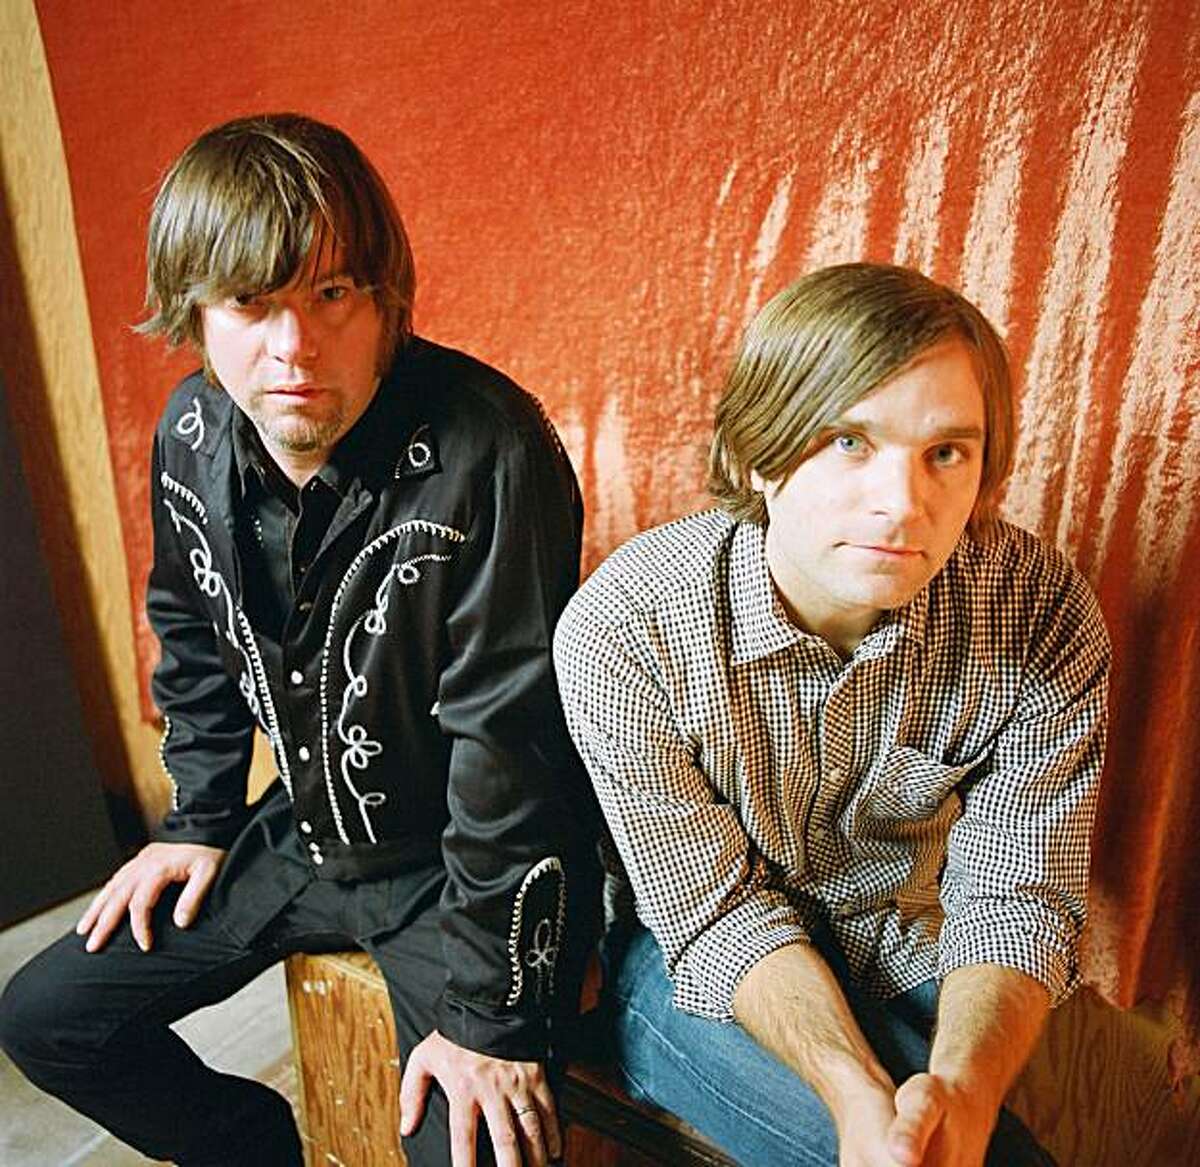 Jay Farrar (l) and Benjamin Gibbard (r) will perform songs from their collaborative album, "One Fast Move Or I'm Gone: Kerouac's Big Sur," at Bimbo's 365 Club on Saturday.